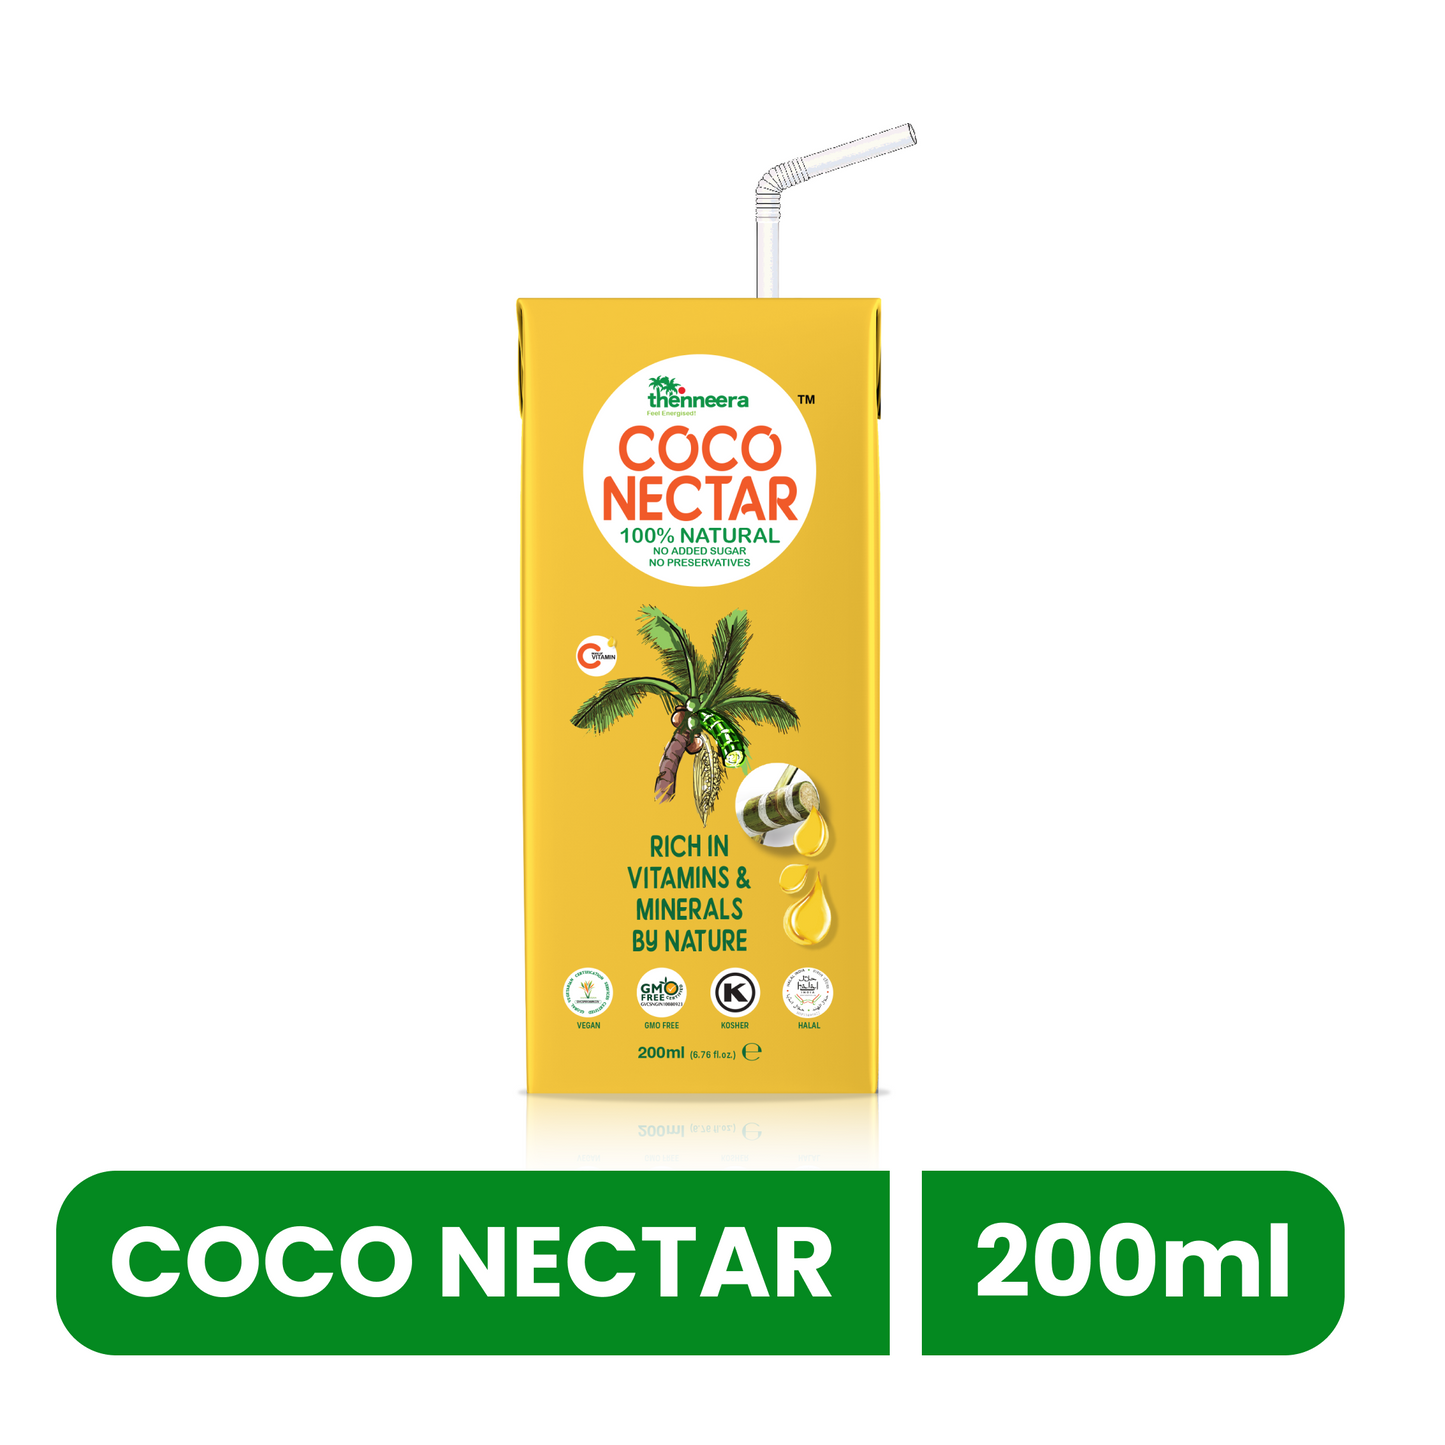 Coco Nectar - 12 Pack